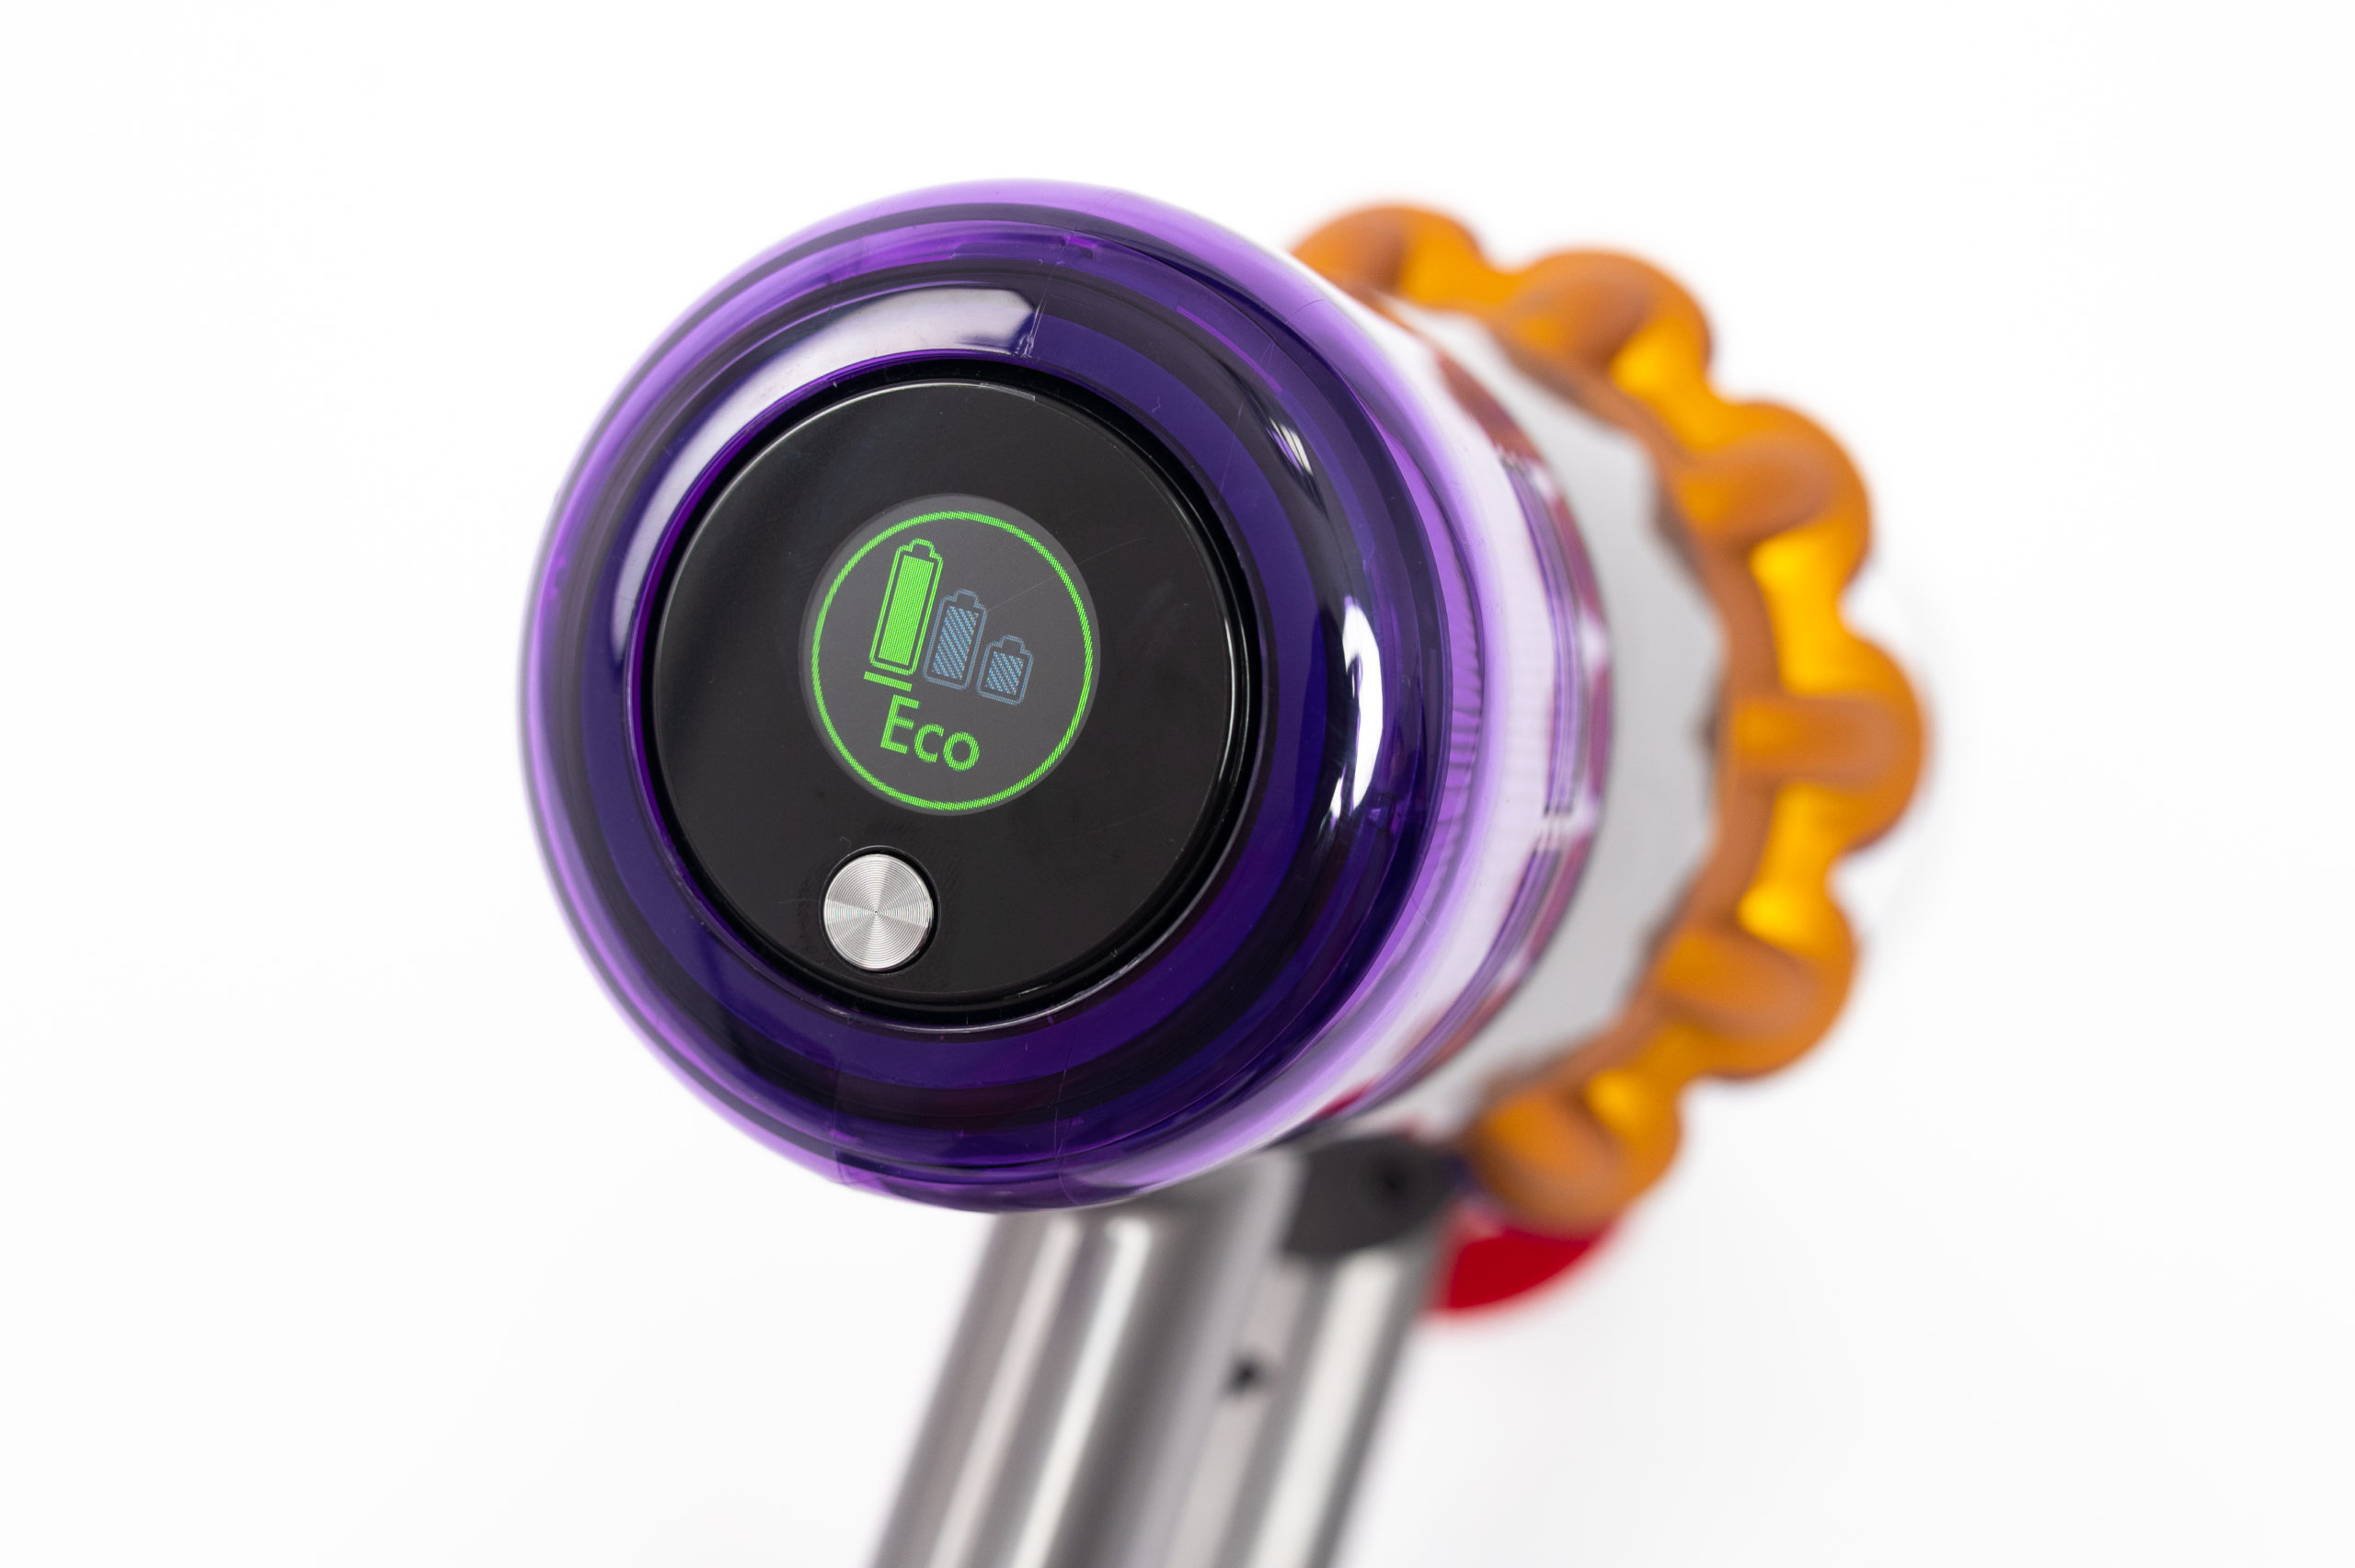 Dyson V15 Detect Review: The Best Vacuum Around